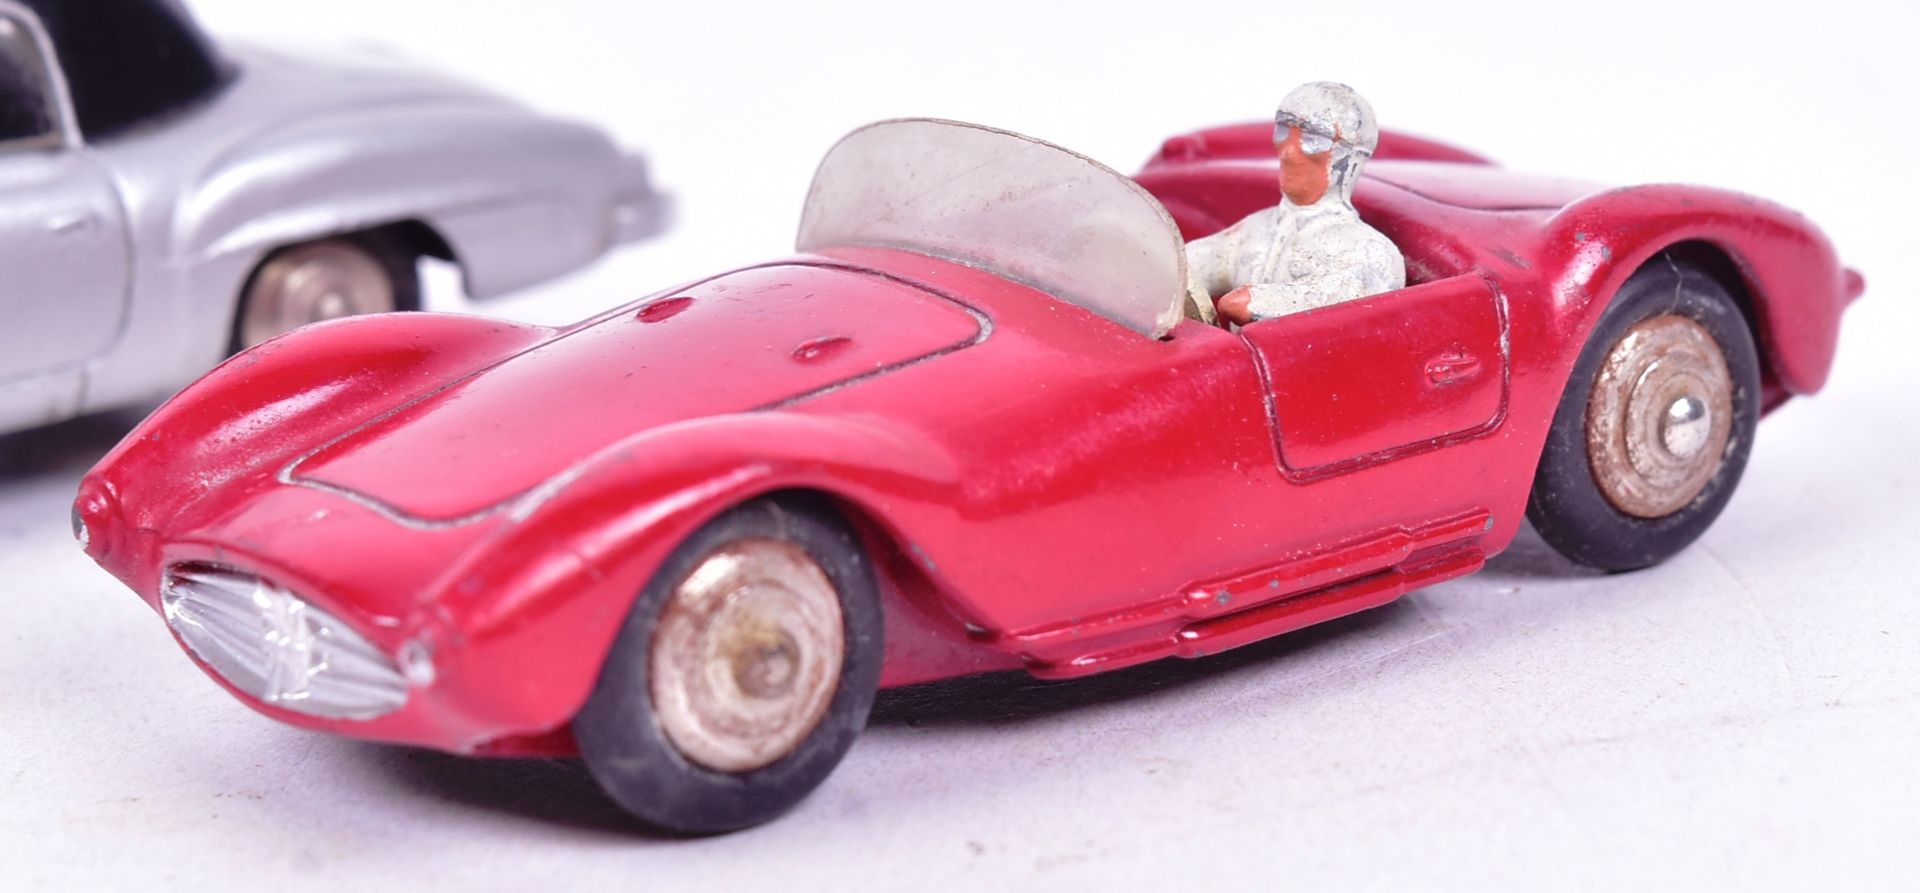 DIECAST - FRENCH DINKY TOYS - MASERATI & MERCEDES 190 SL - Image 2 of 6